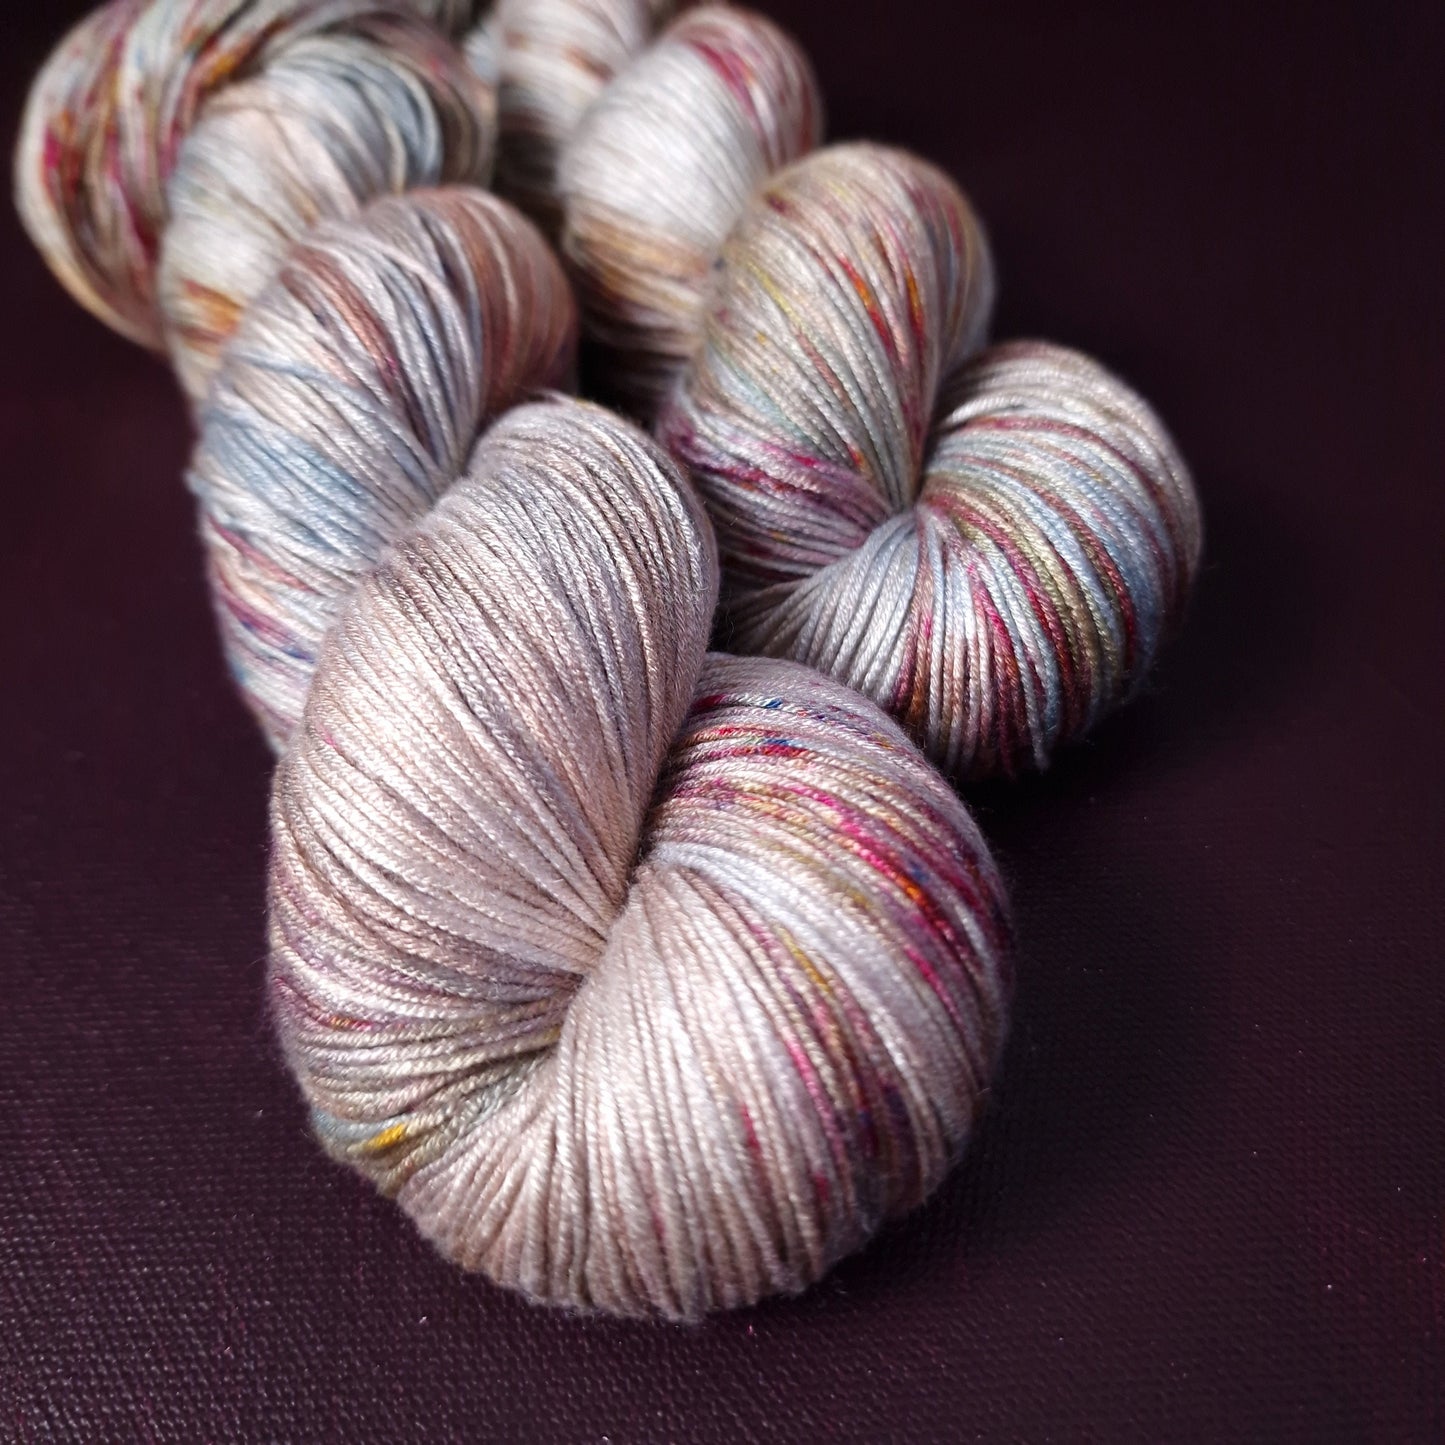 Hand dyed yarn ~ At Peace *** Dyed to order ~ fingering / DK weight tencel OR bamboo yarn, vegan, hand painted